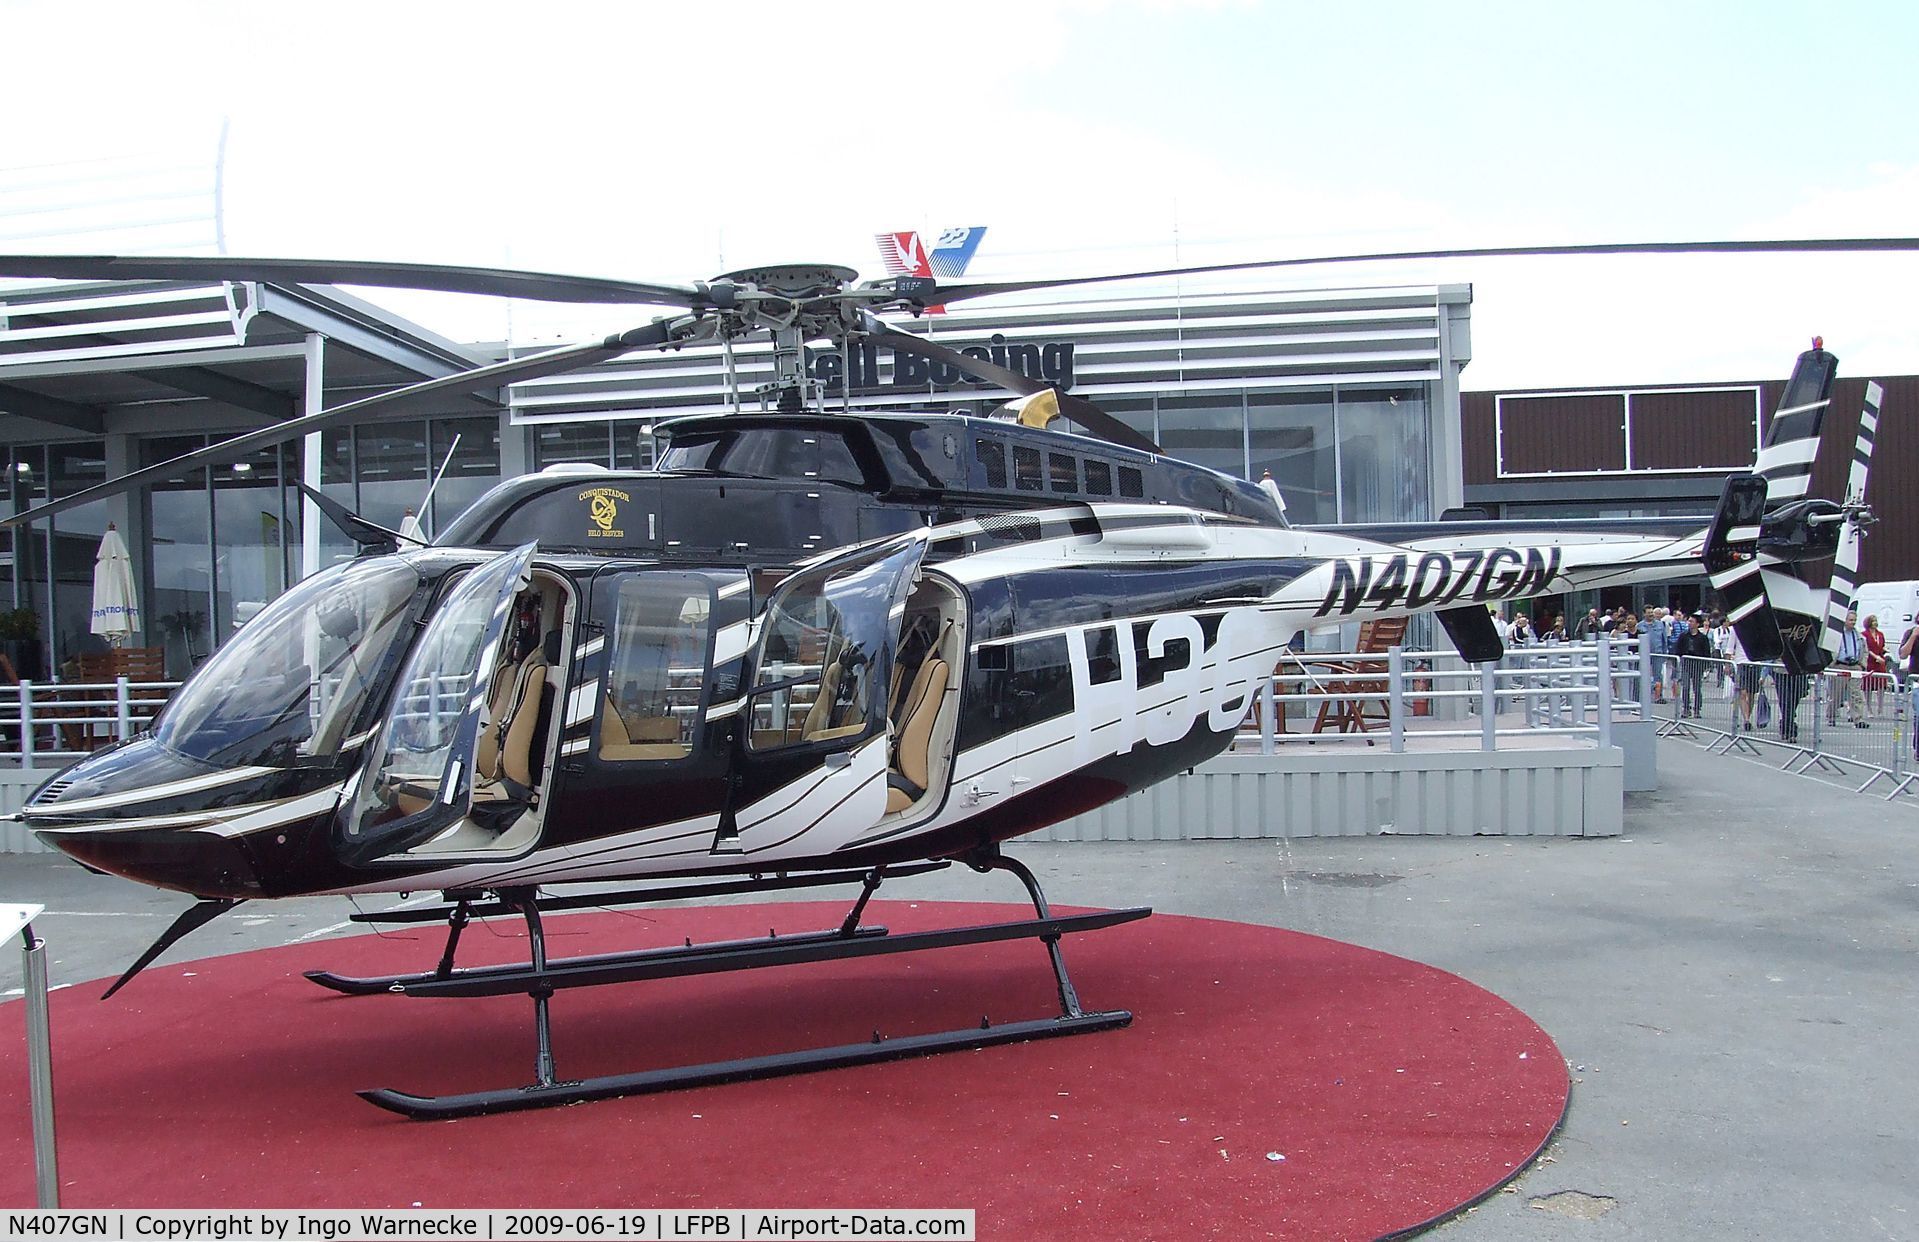 N407GN, 2002 Bell 407 C/N 53539, Bell 407 of Conquistador Helo Services at the Aerosalon 2009, Paris